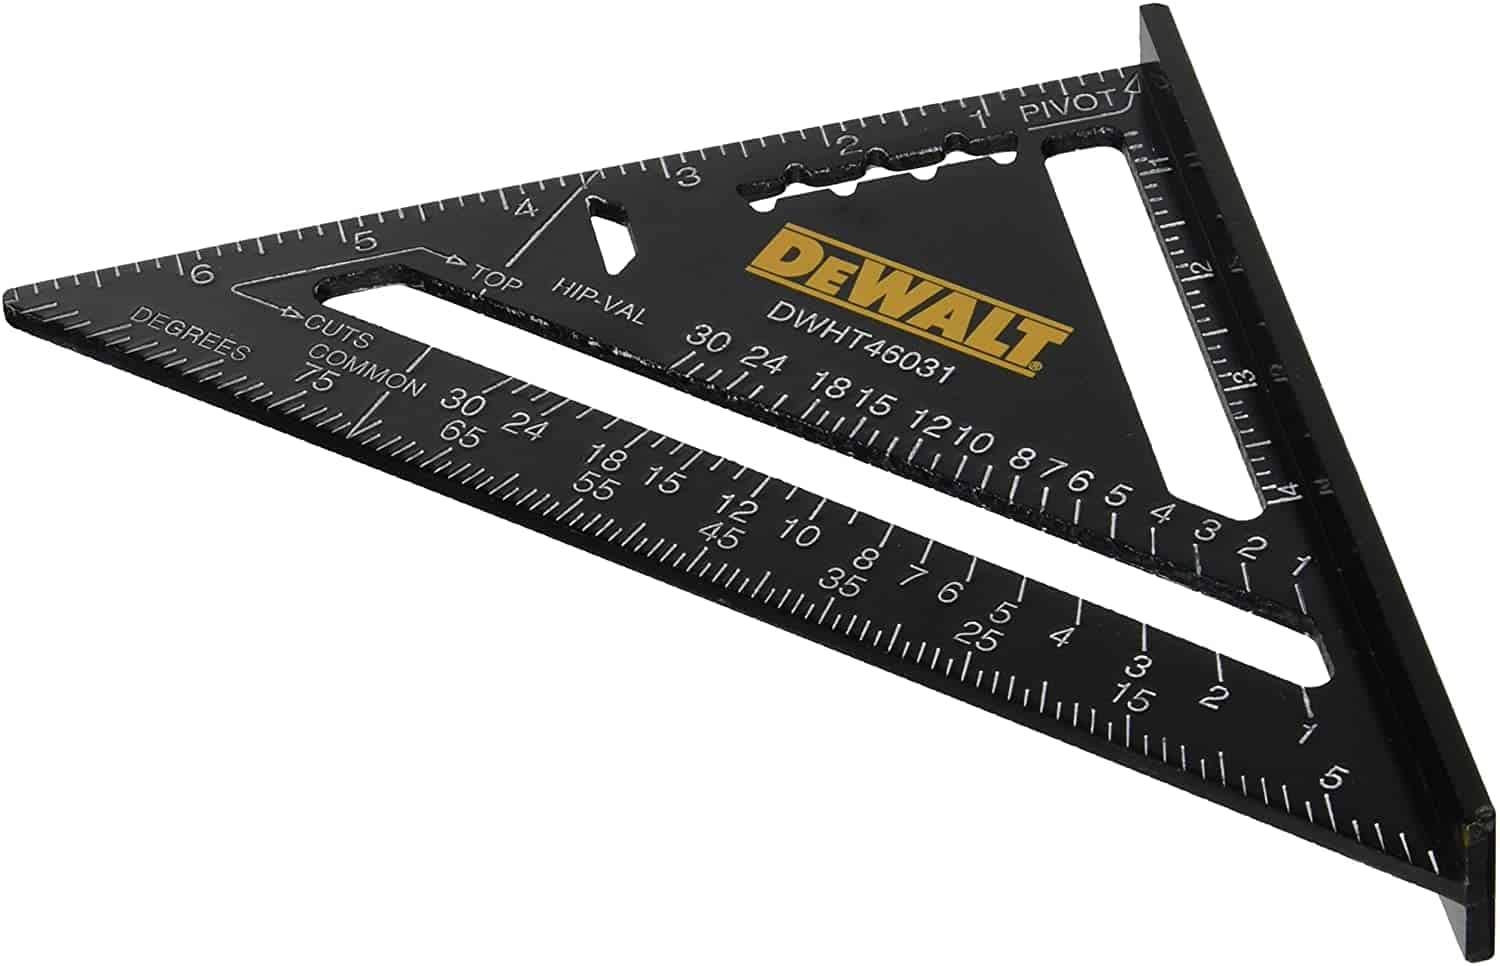 Best speed square for small DIY projects- DEWALT DWHT46031 Aluminum 7-inch Premium Rafter Square